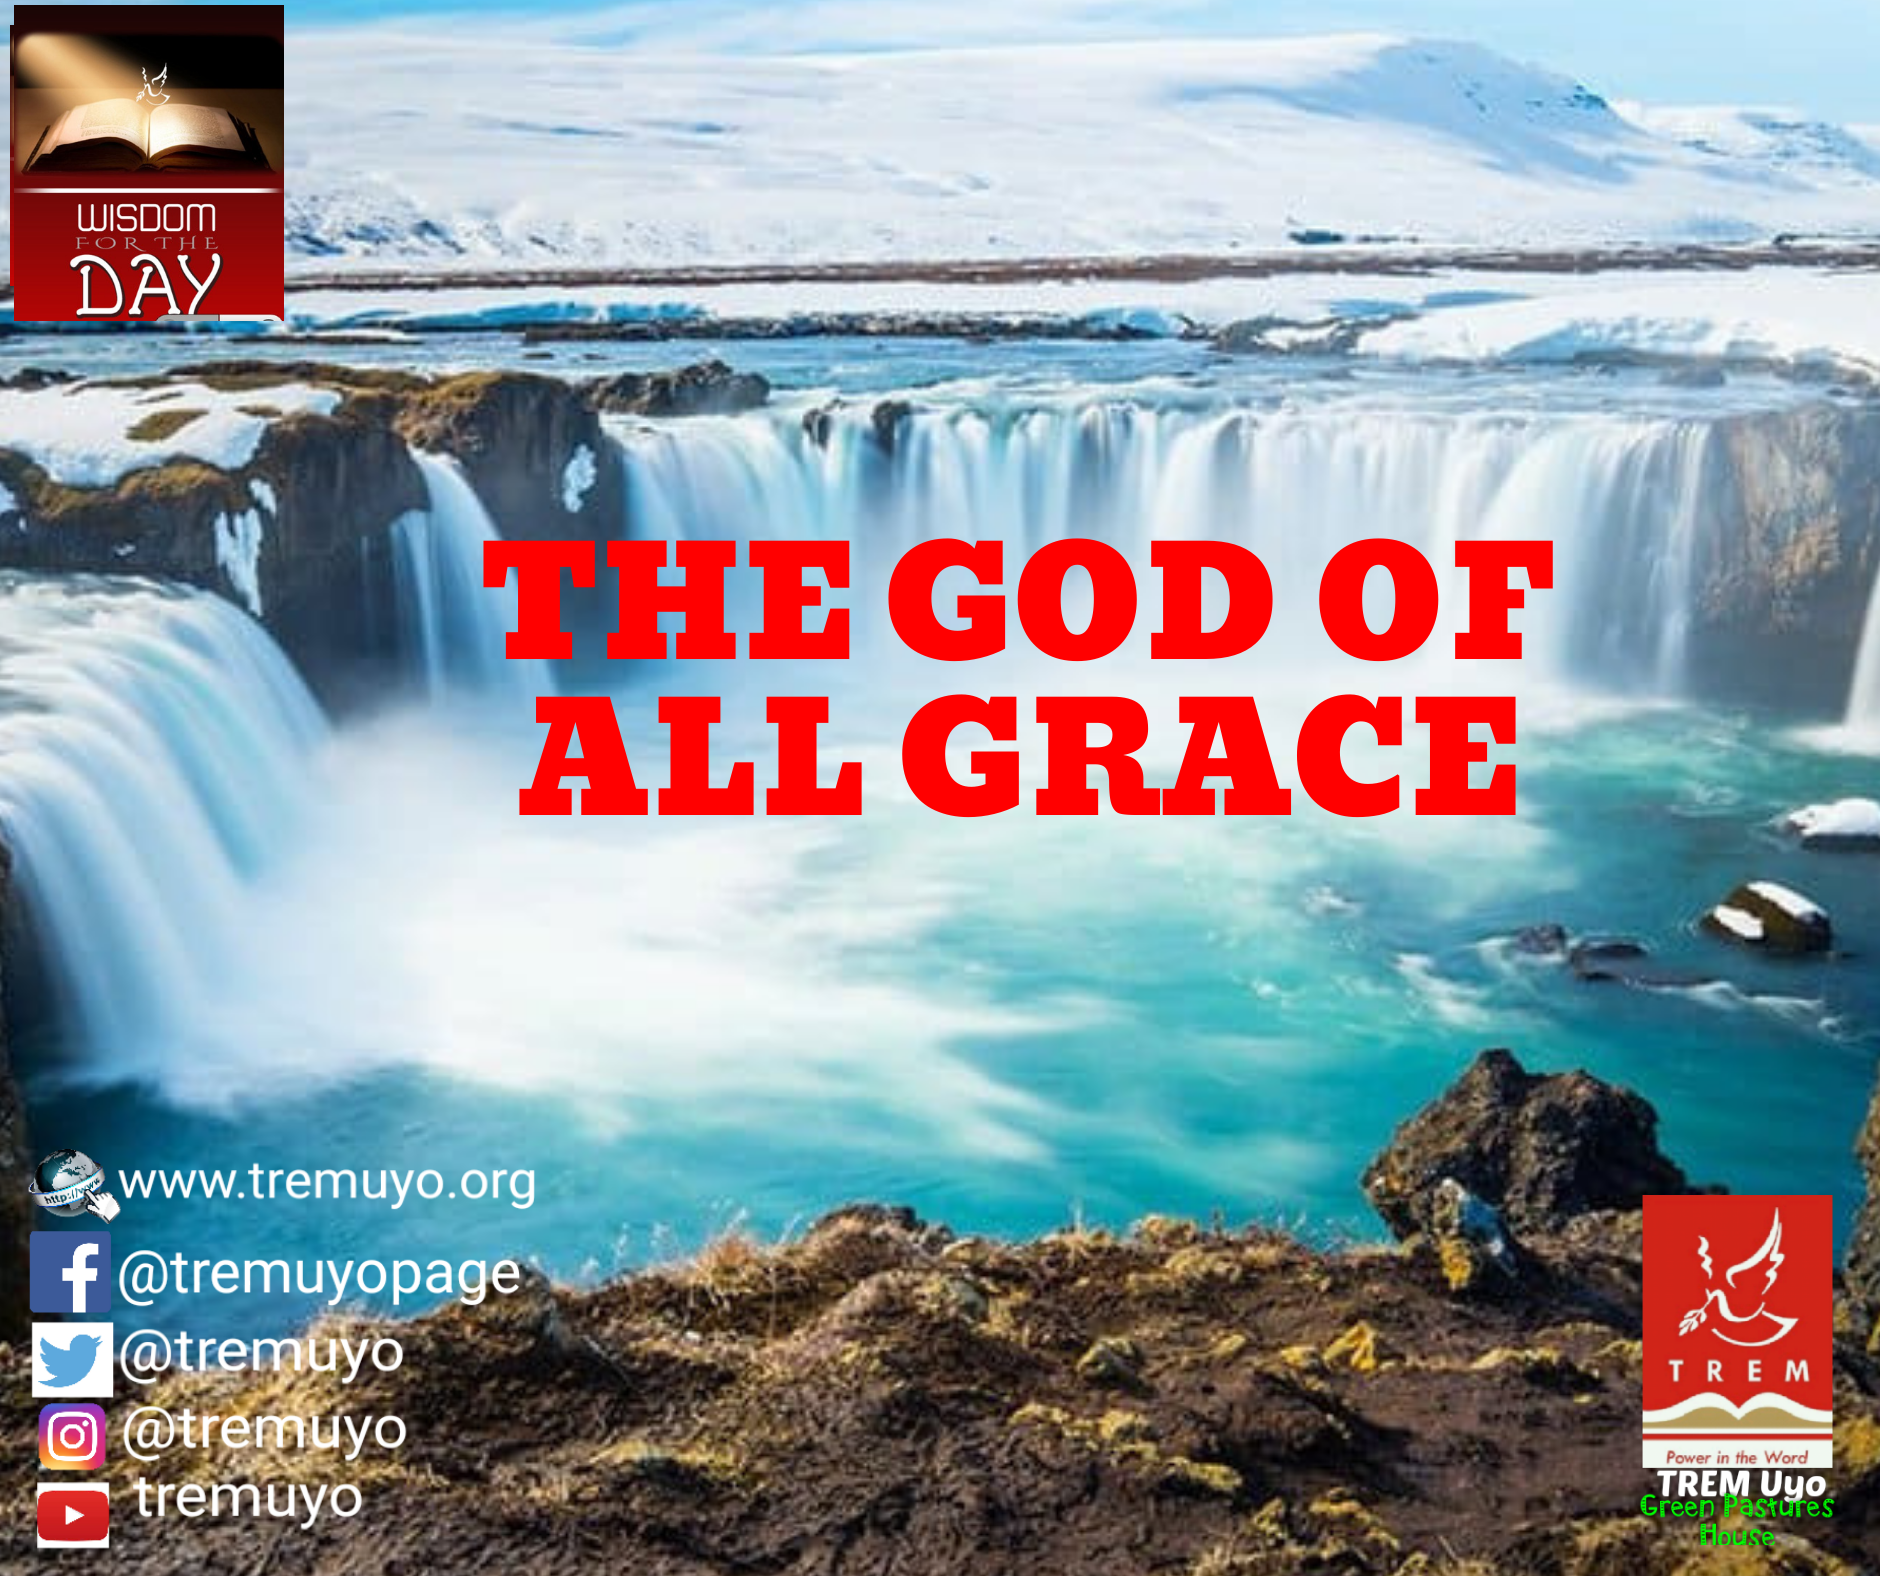 THE GOD OF ALL GRACE